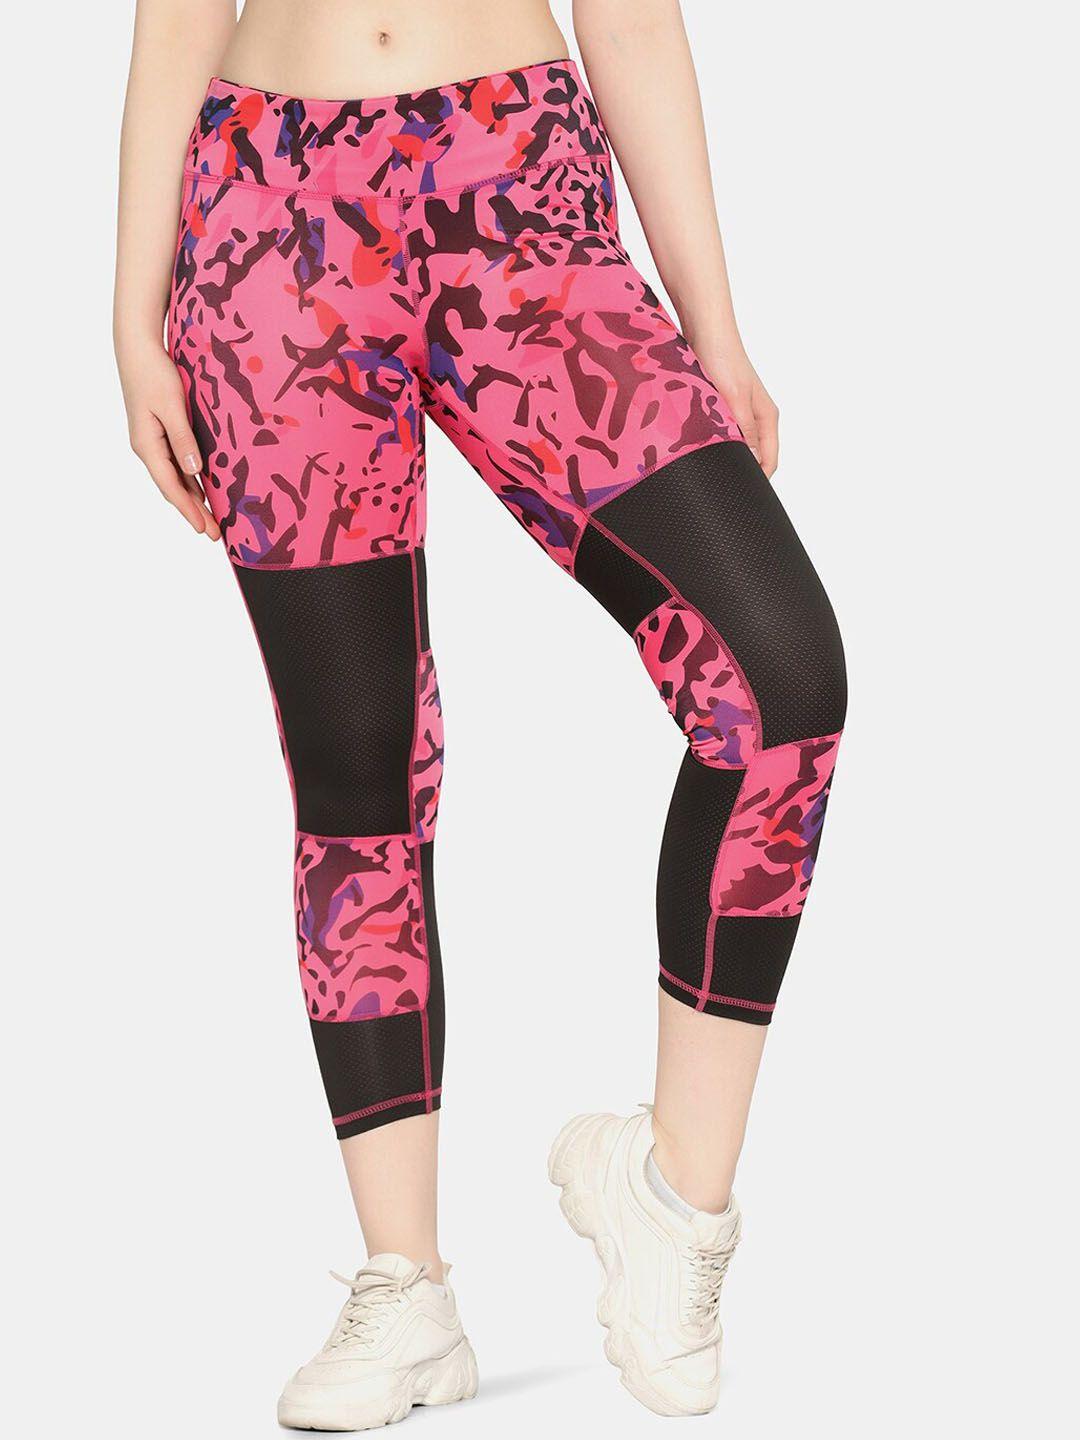 da-intimo-women-printed-ankle-length-sports-tights